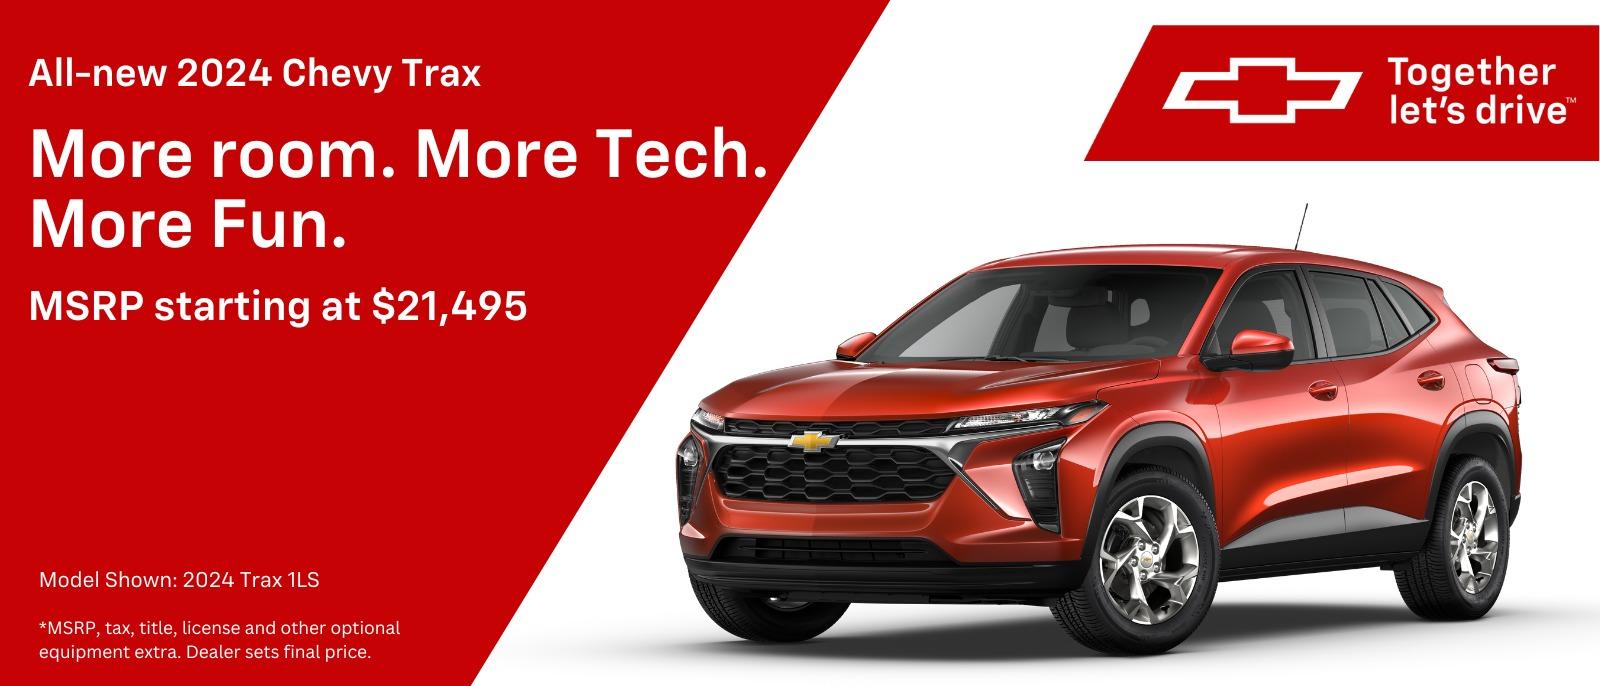 New 2024 Chevy Trax
More Room. More Tech. More Fun.
MSRP starting at $21,495